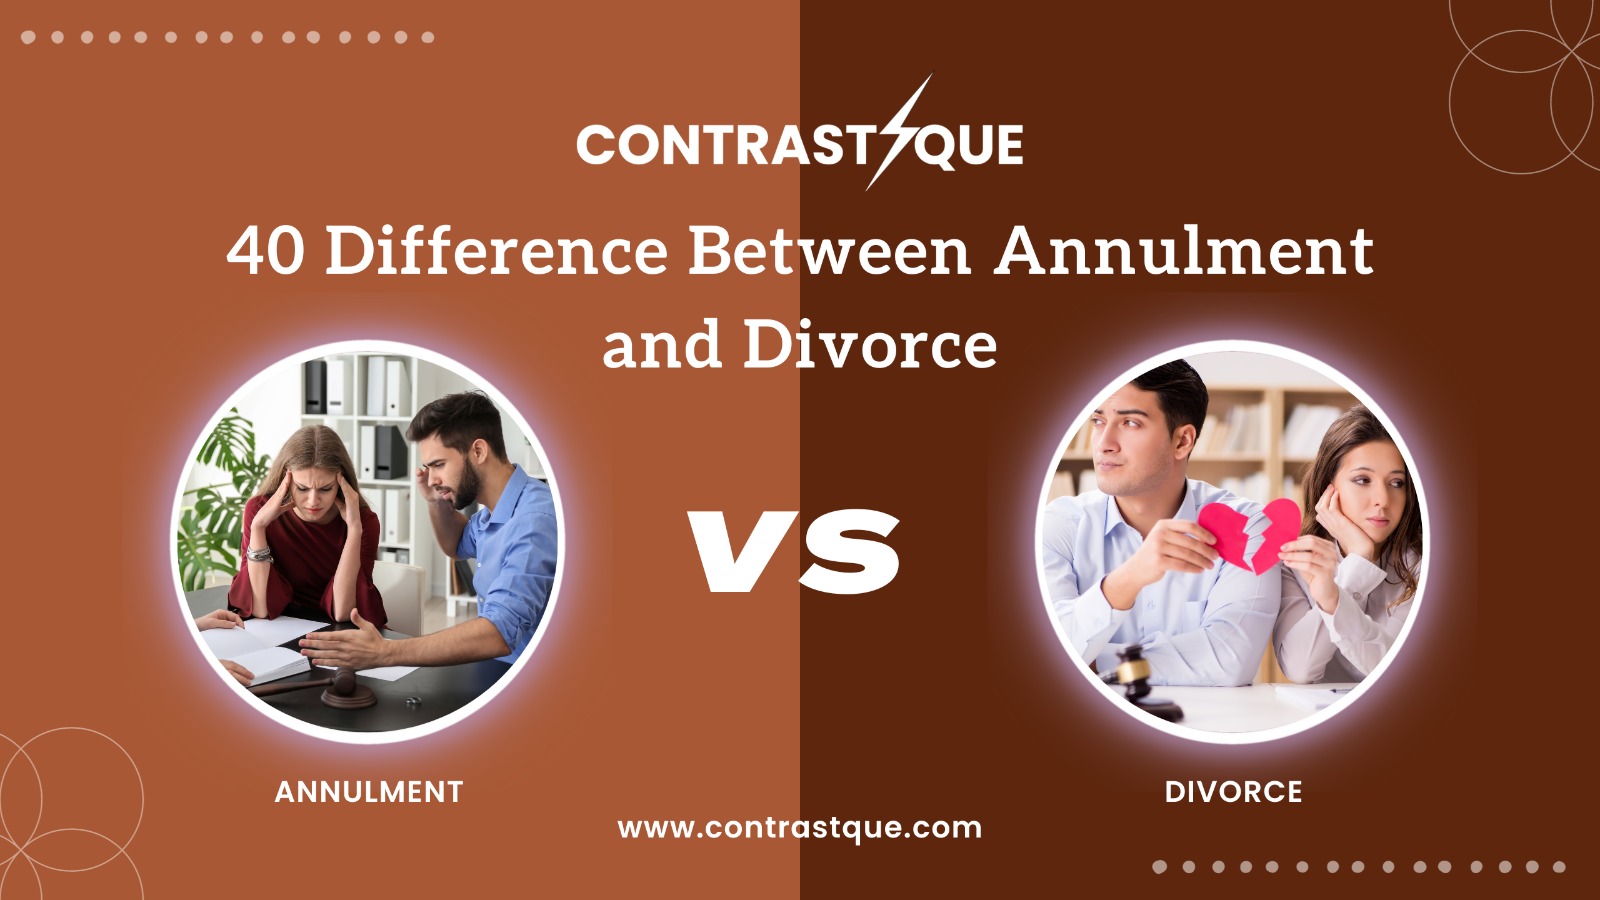 40 Difference Between Annulment and Divorce